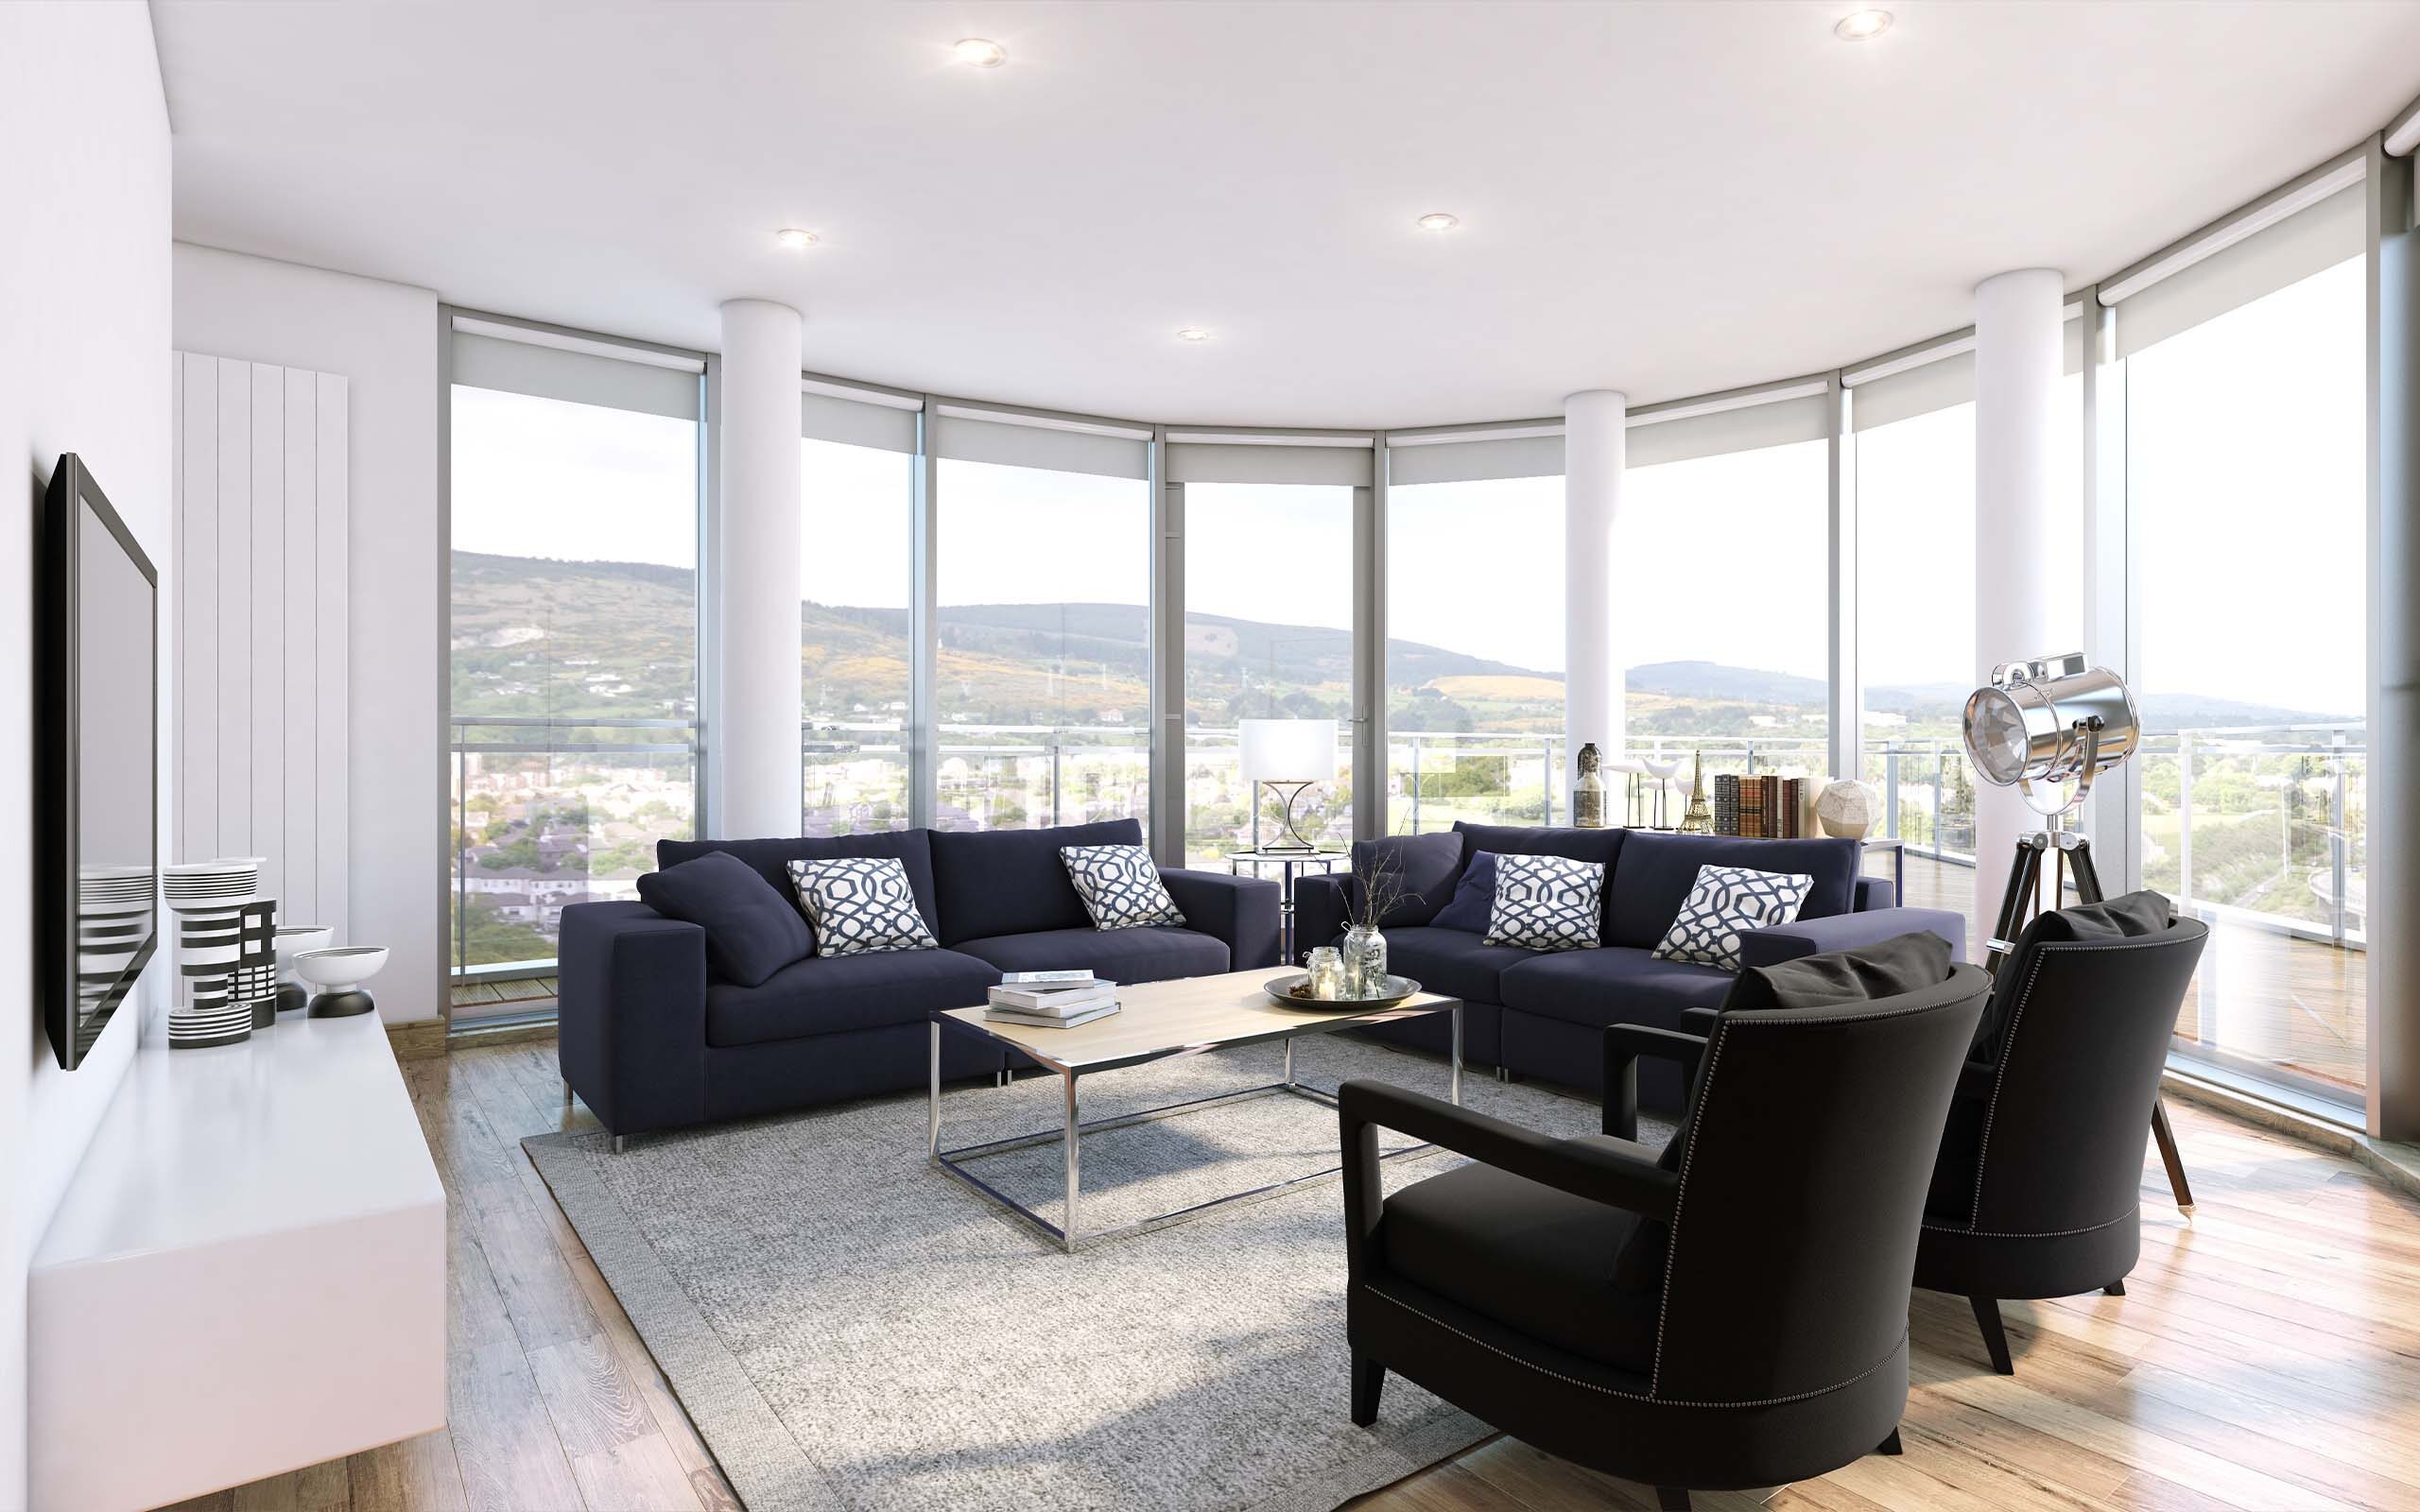 Interior render of a living room in a luxury apartment development.